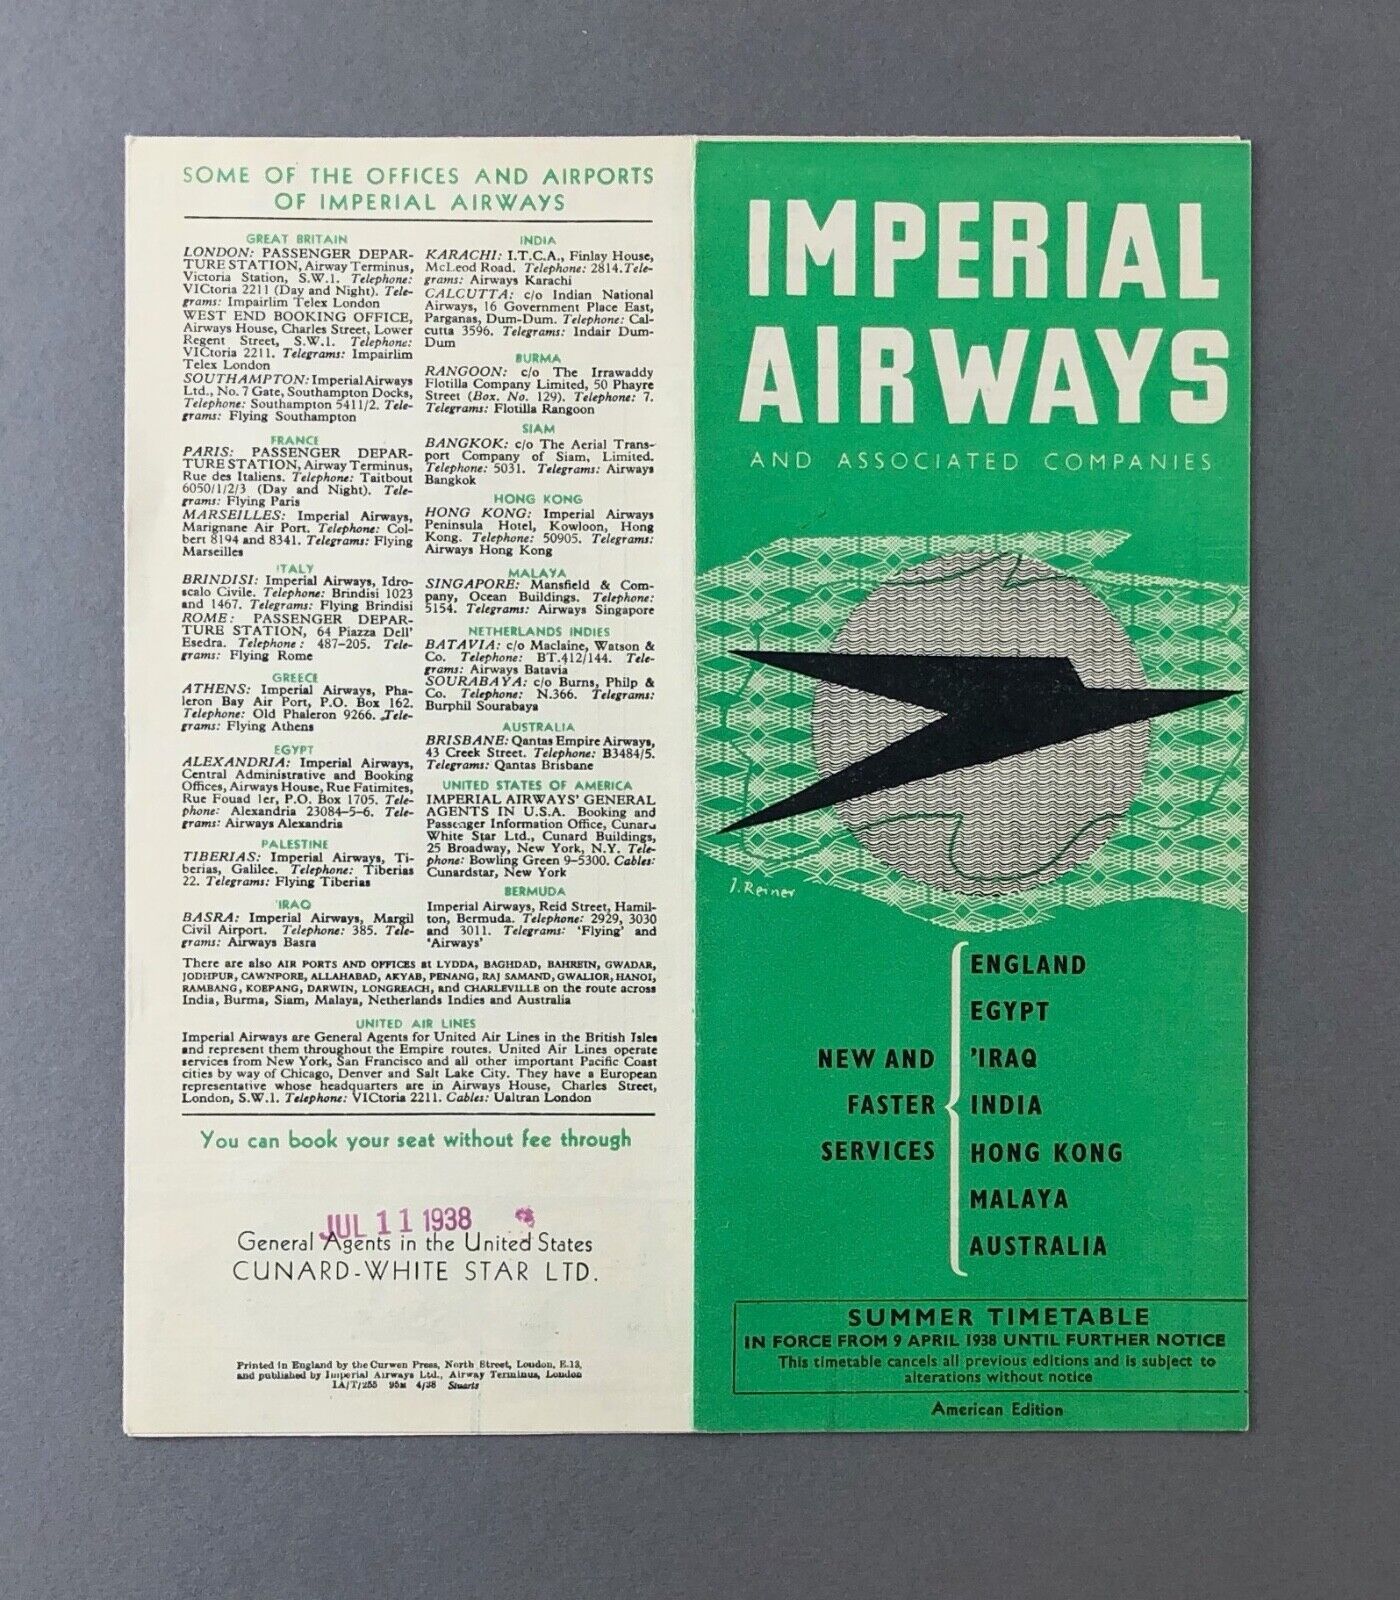 IMPERIAL AIRWAYS APRIL 1938 AIRLINE TIMETABLE EGYPT IRAQ HONG KONG AUSTRALIA